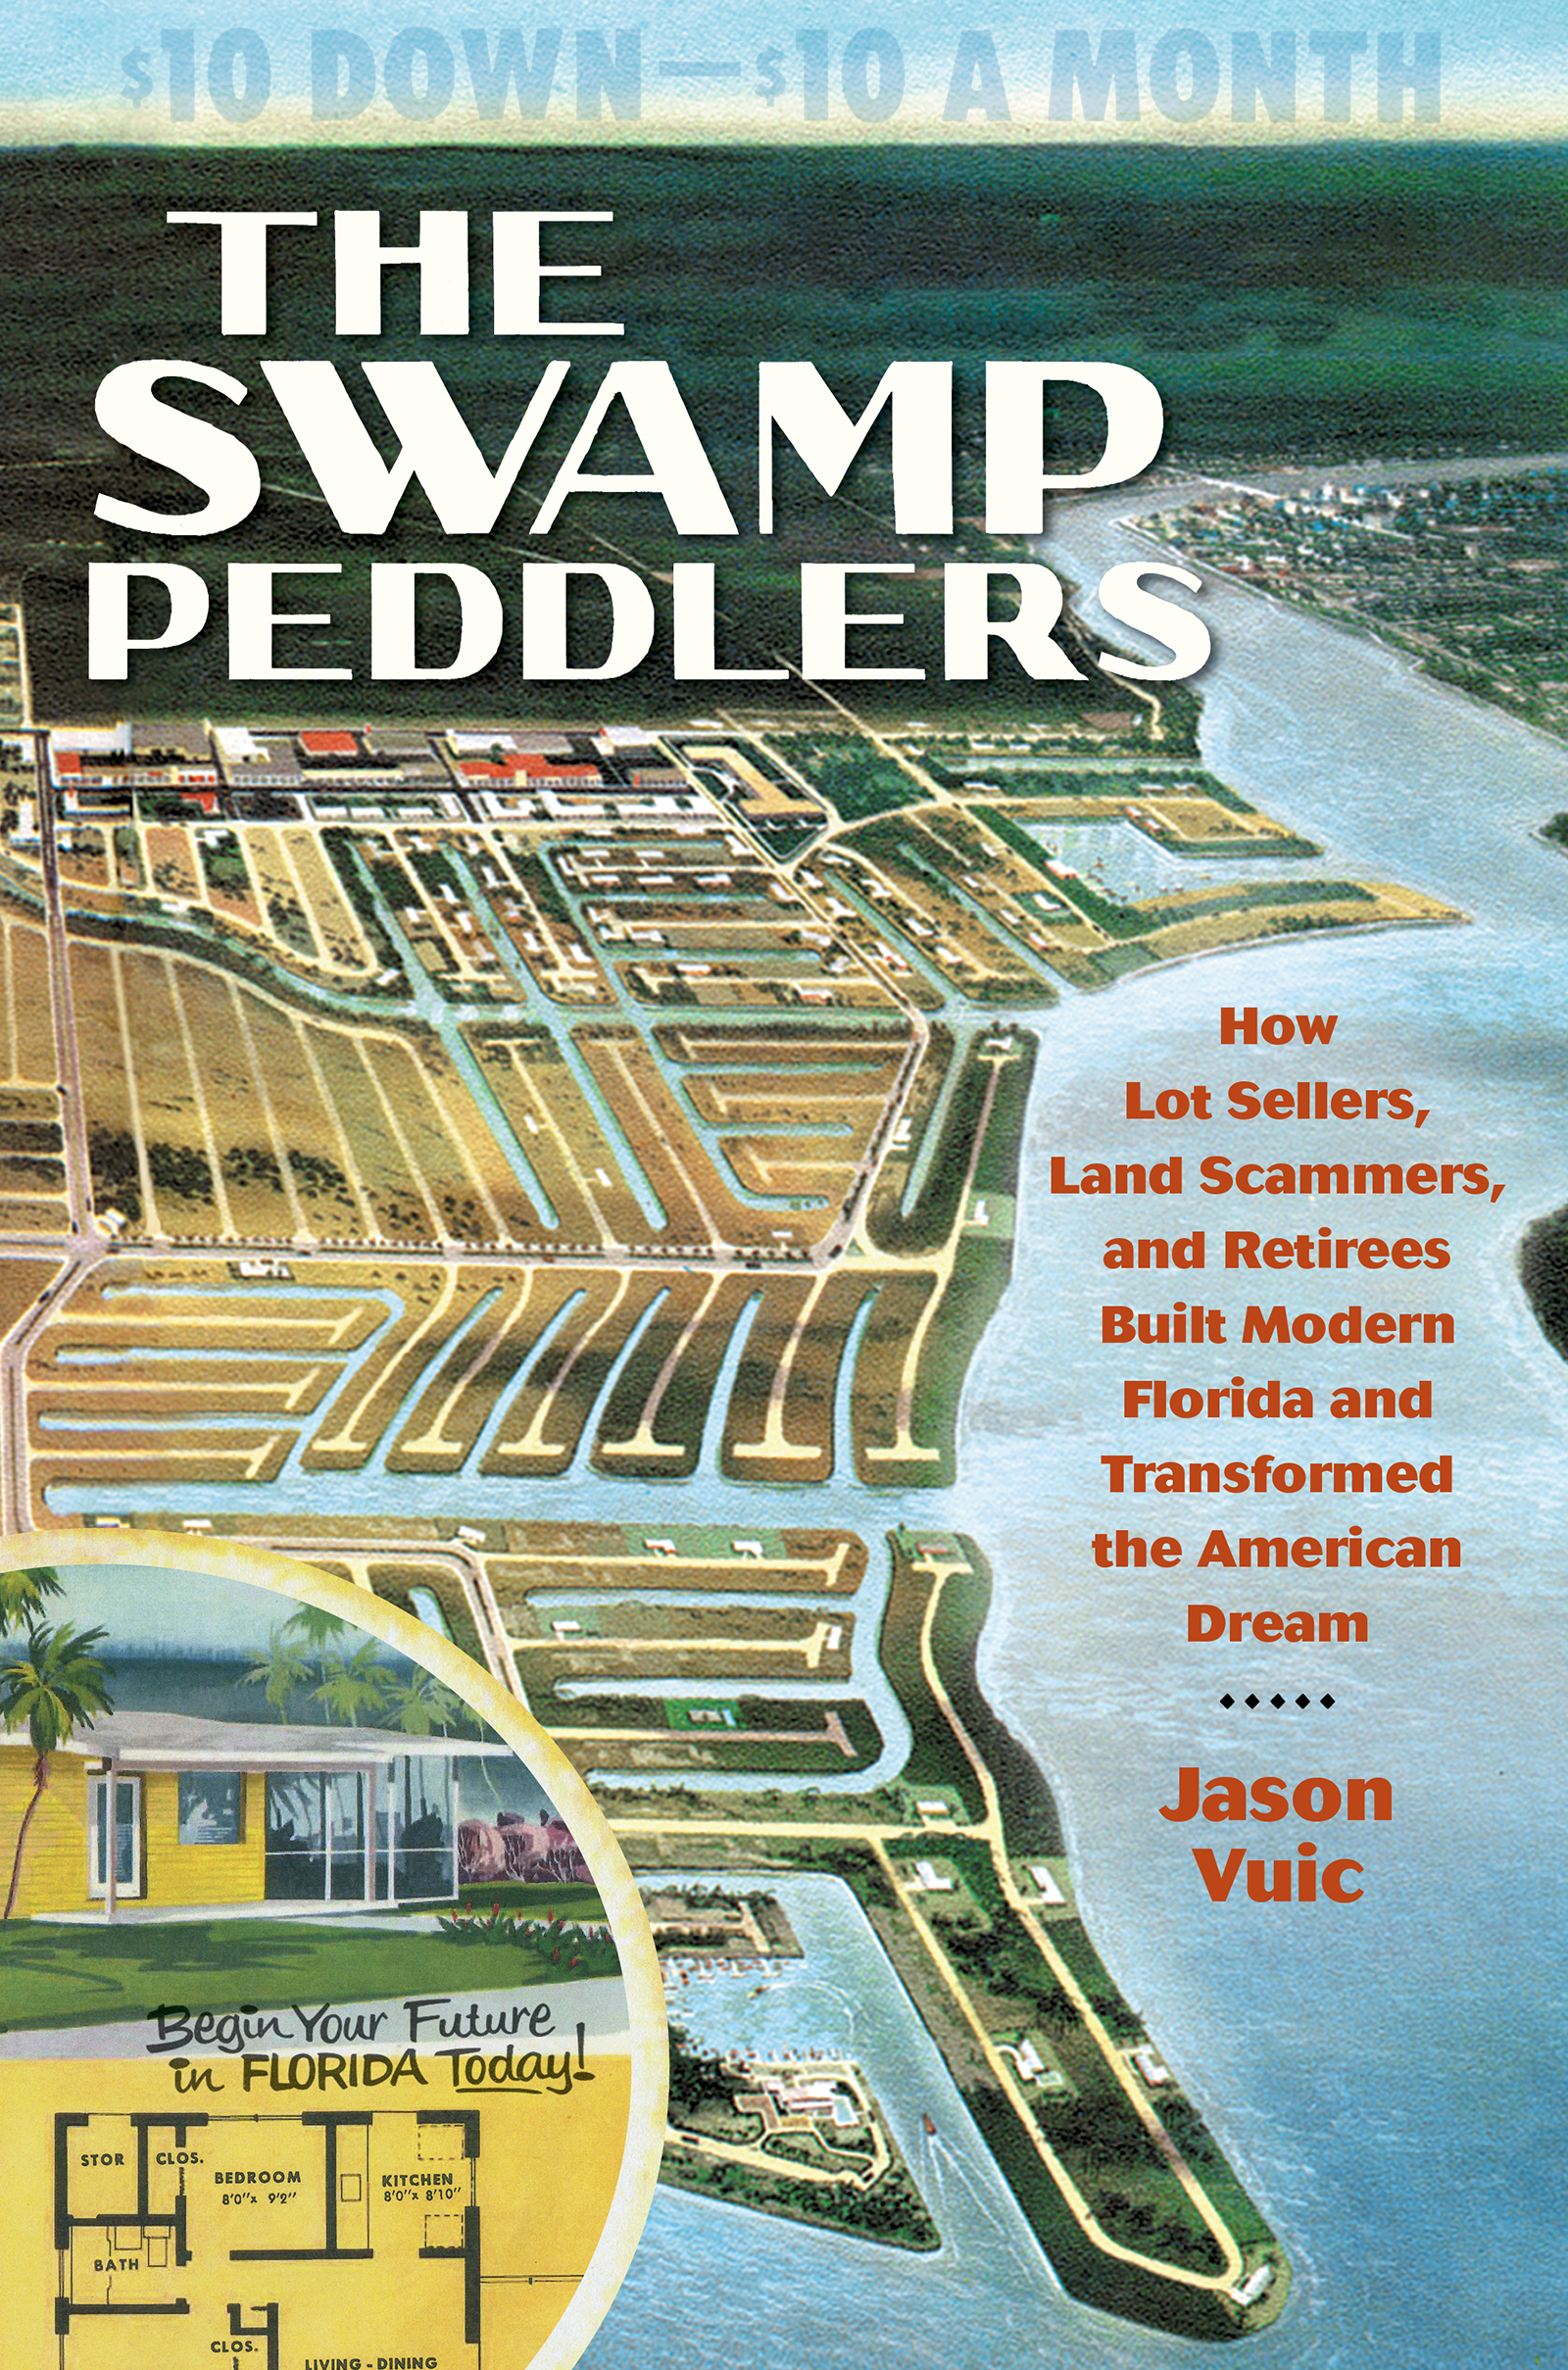 Image de couverture de The Swamp Peddlers [electronic resource] : How Lot Sellers, Land Scammers, and Retirees Built Modern Florida and Transformed the American Dream